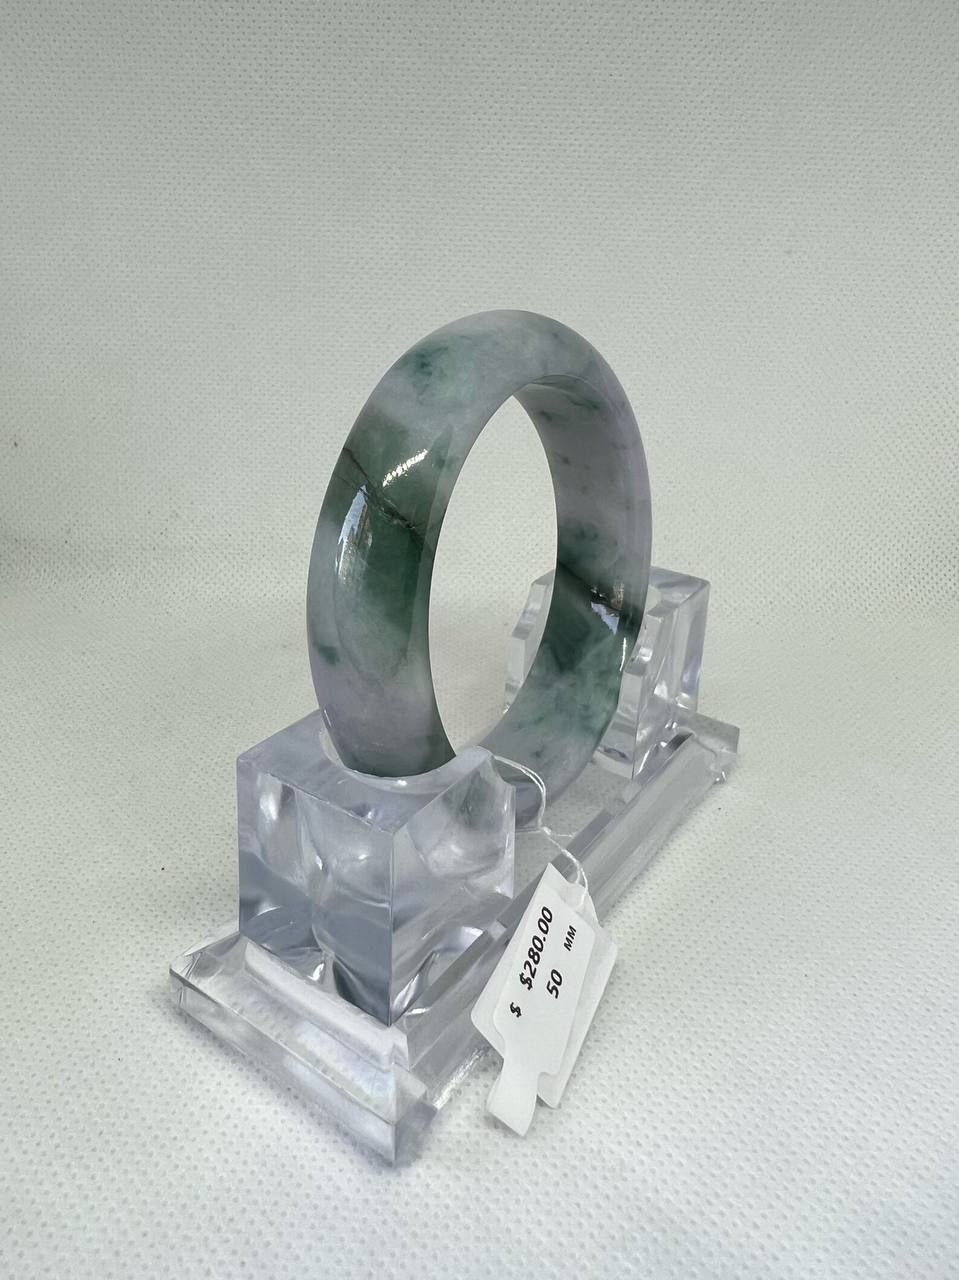 Grade A Natural Jade Bangle with certificate #36934